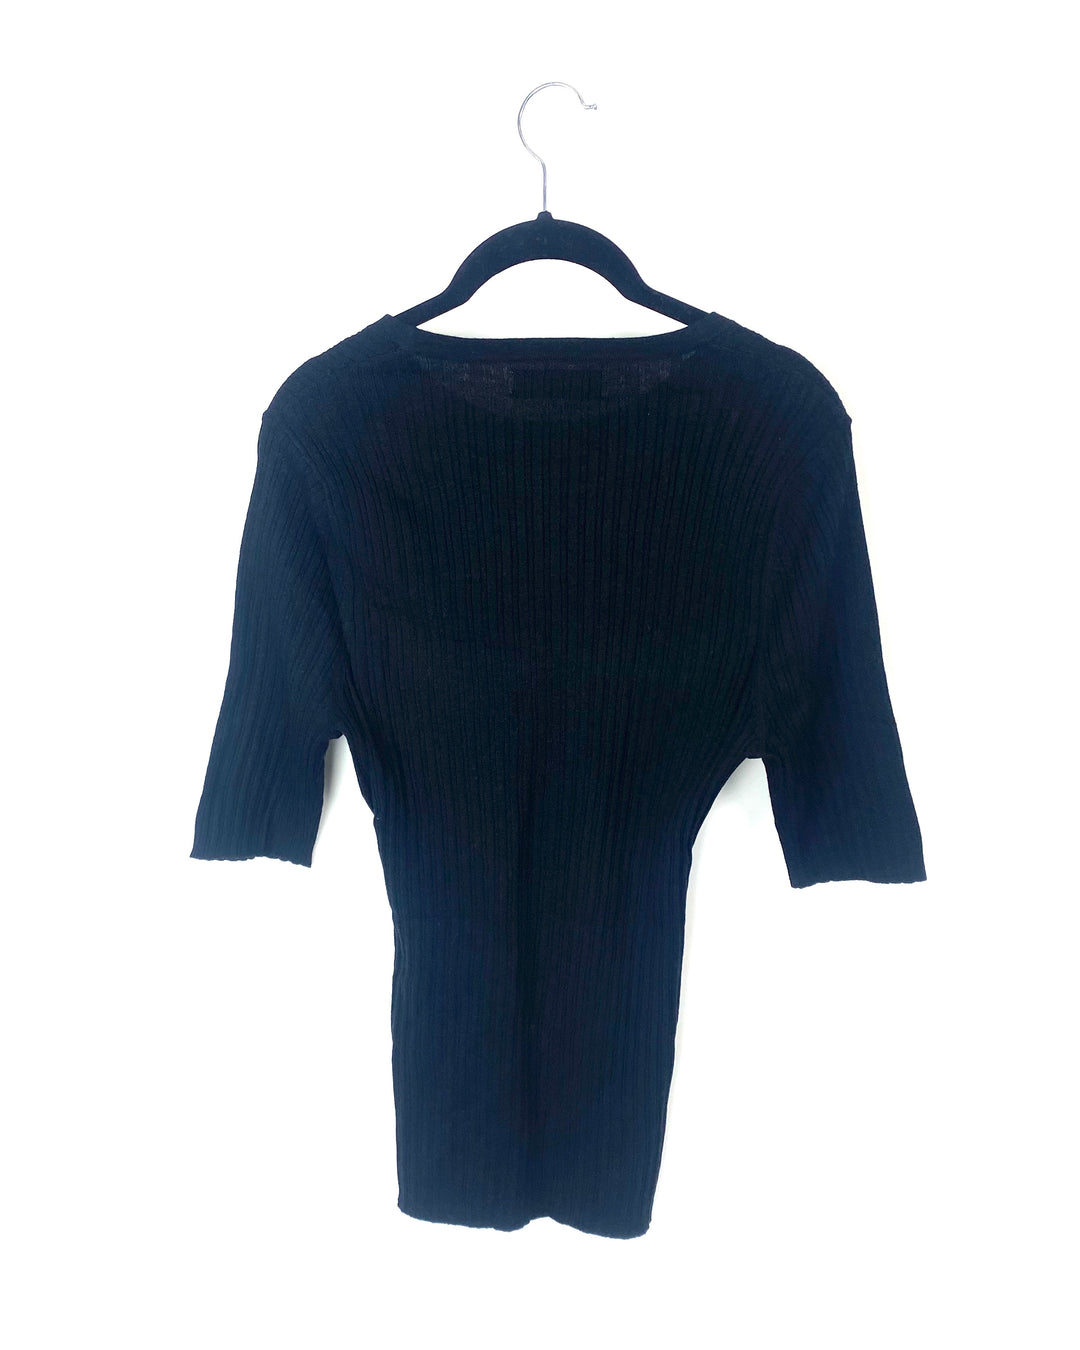 Black Ribbed Top - Extra Small and Small